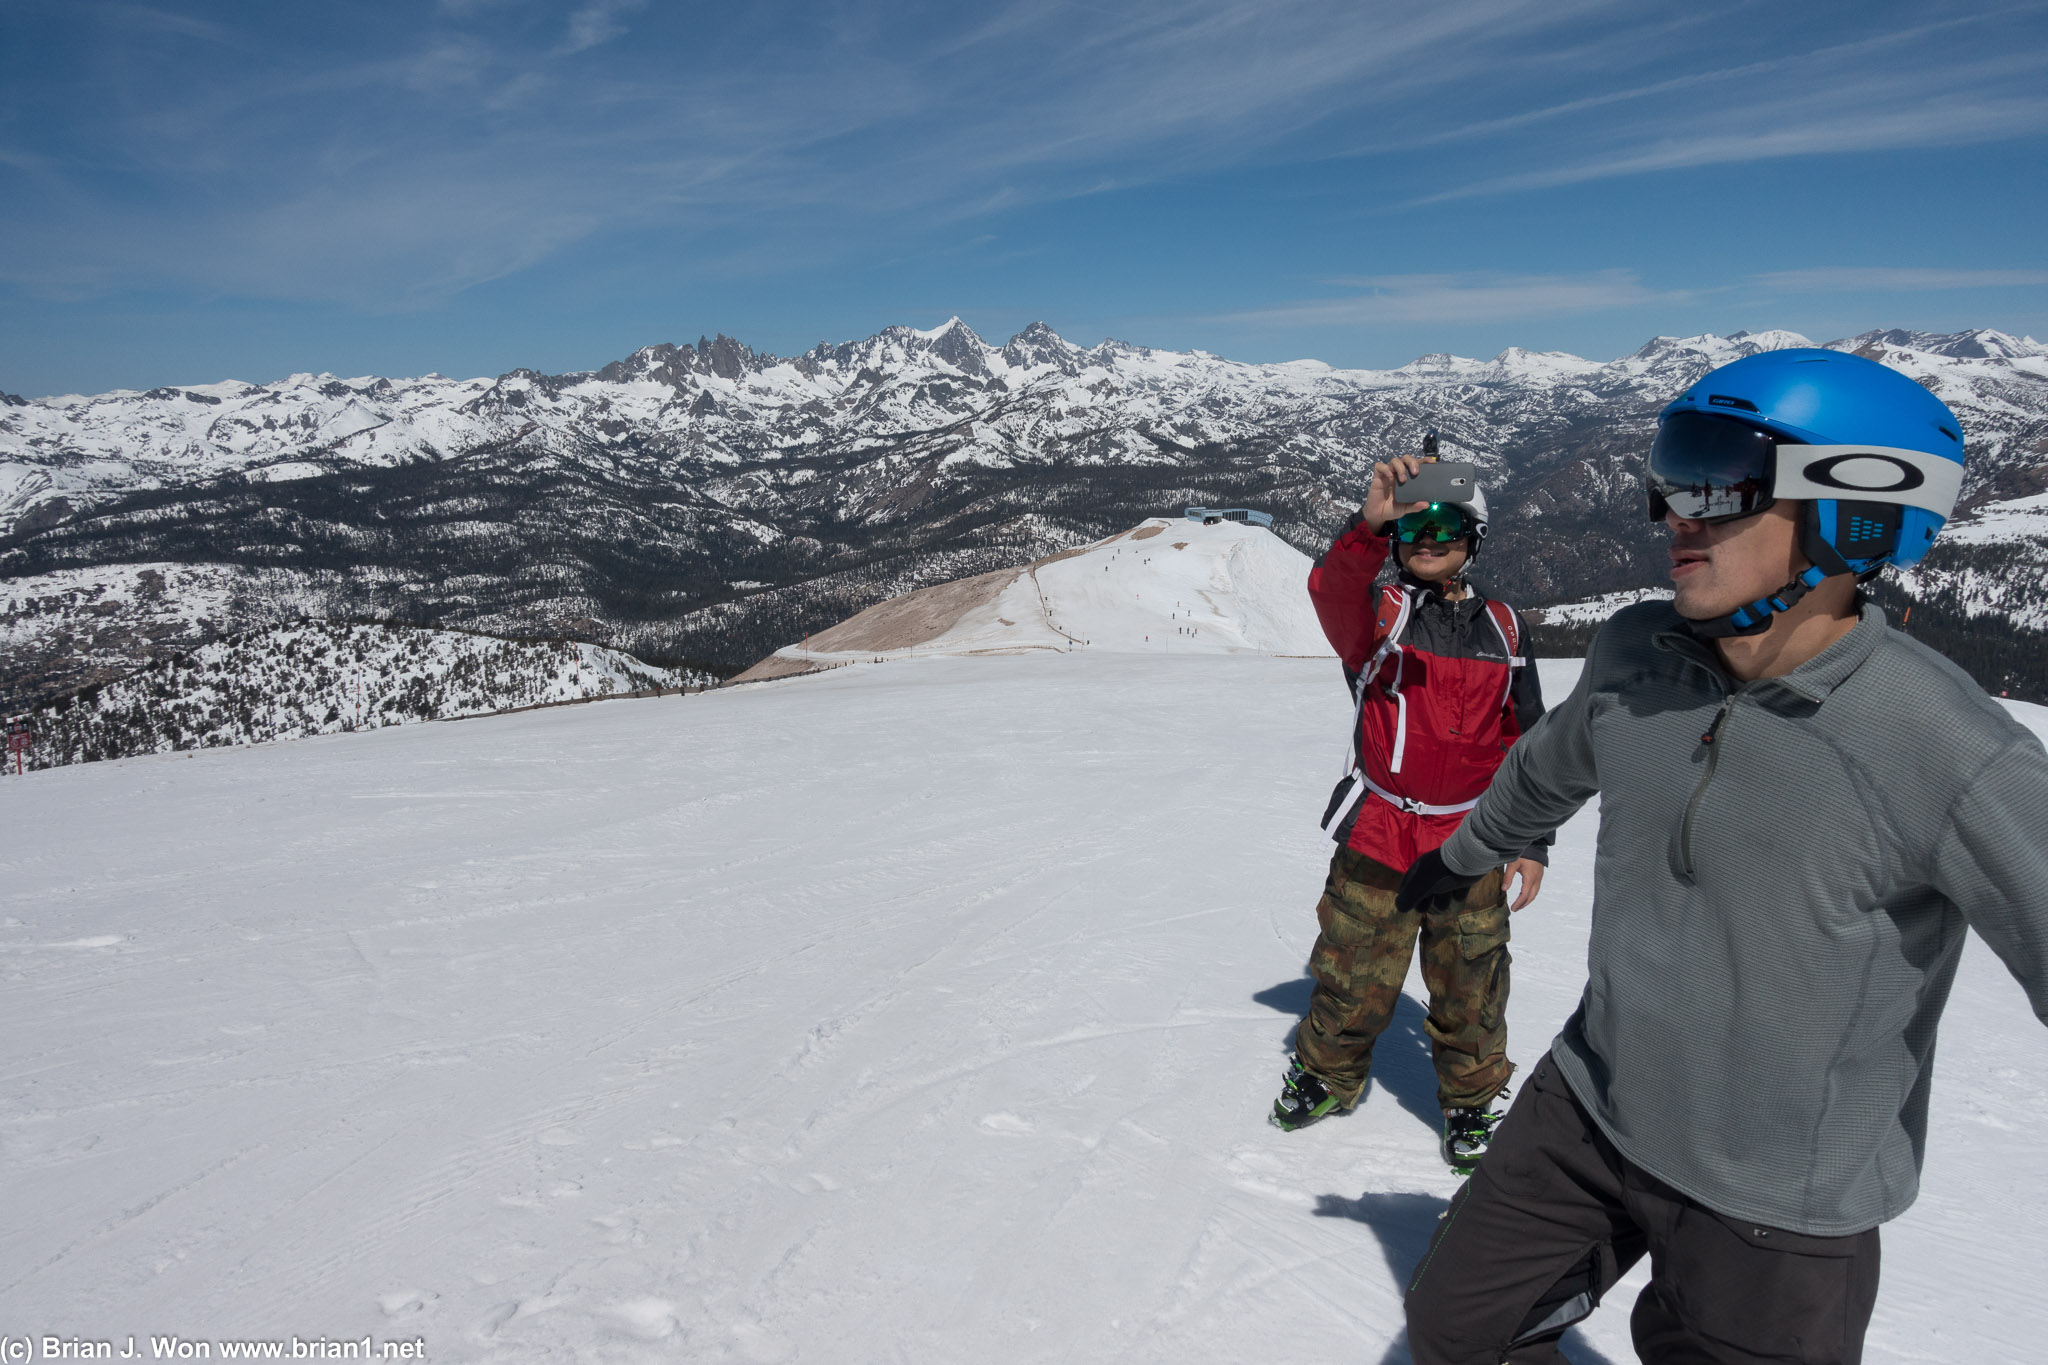 Hangin' at the top of Mammoth Mountain.